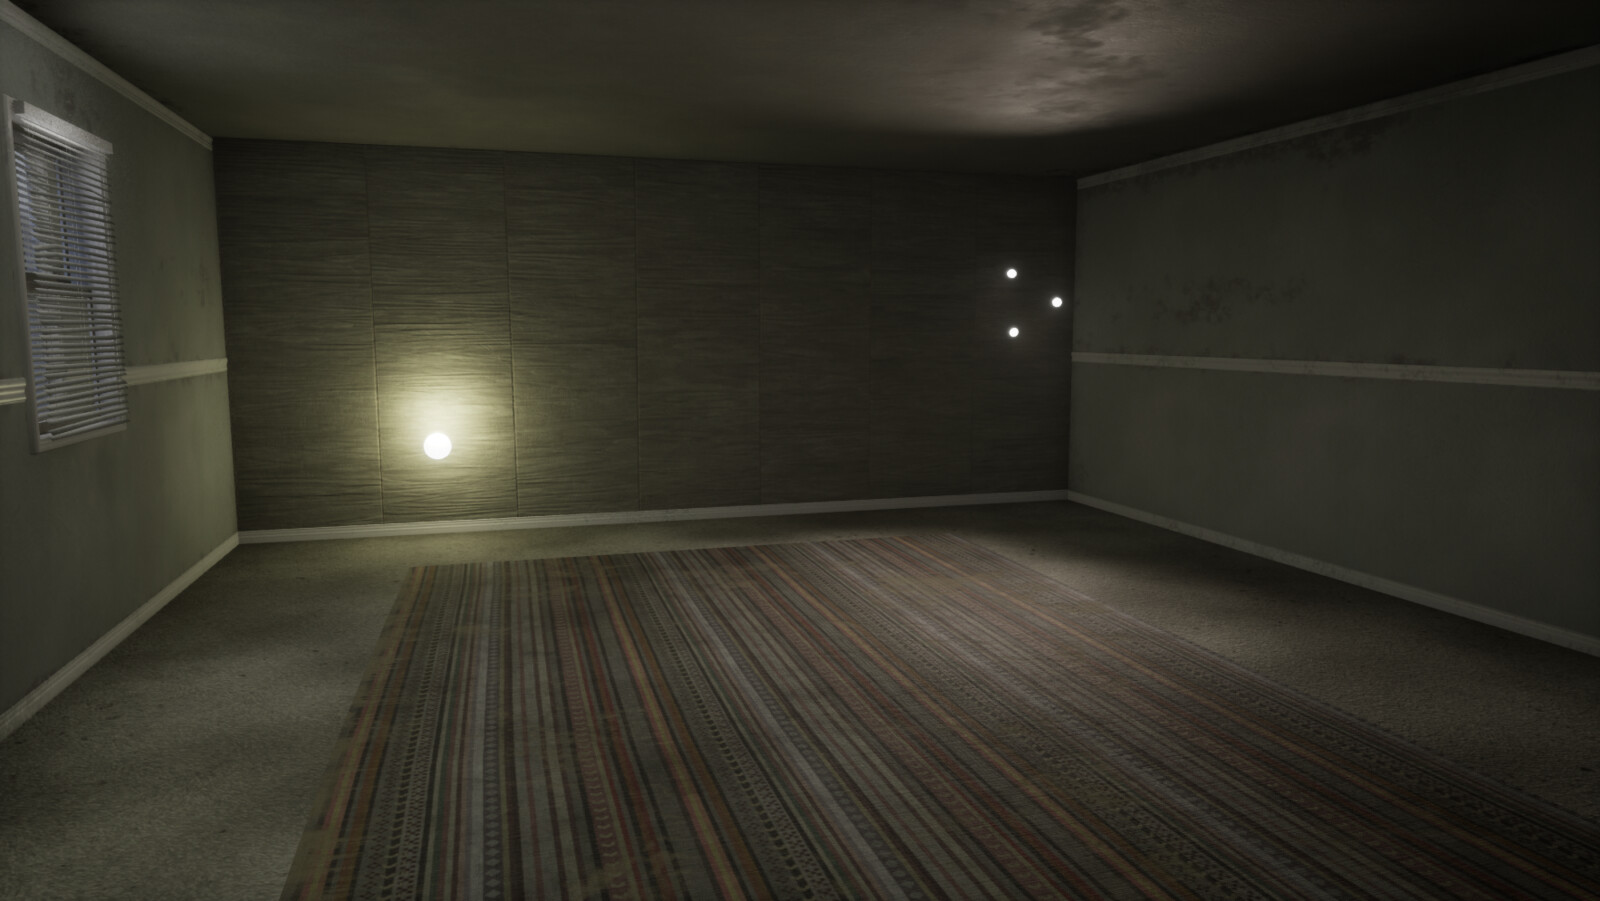 Modeled and textured floors, walls, and windows.